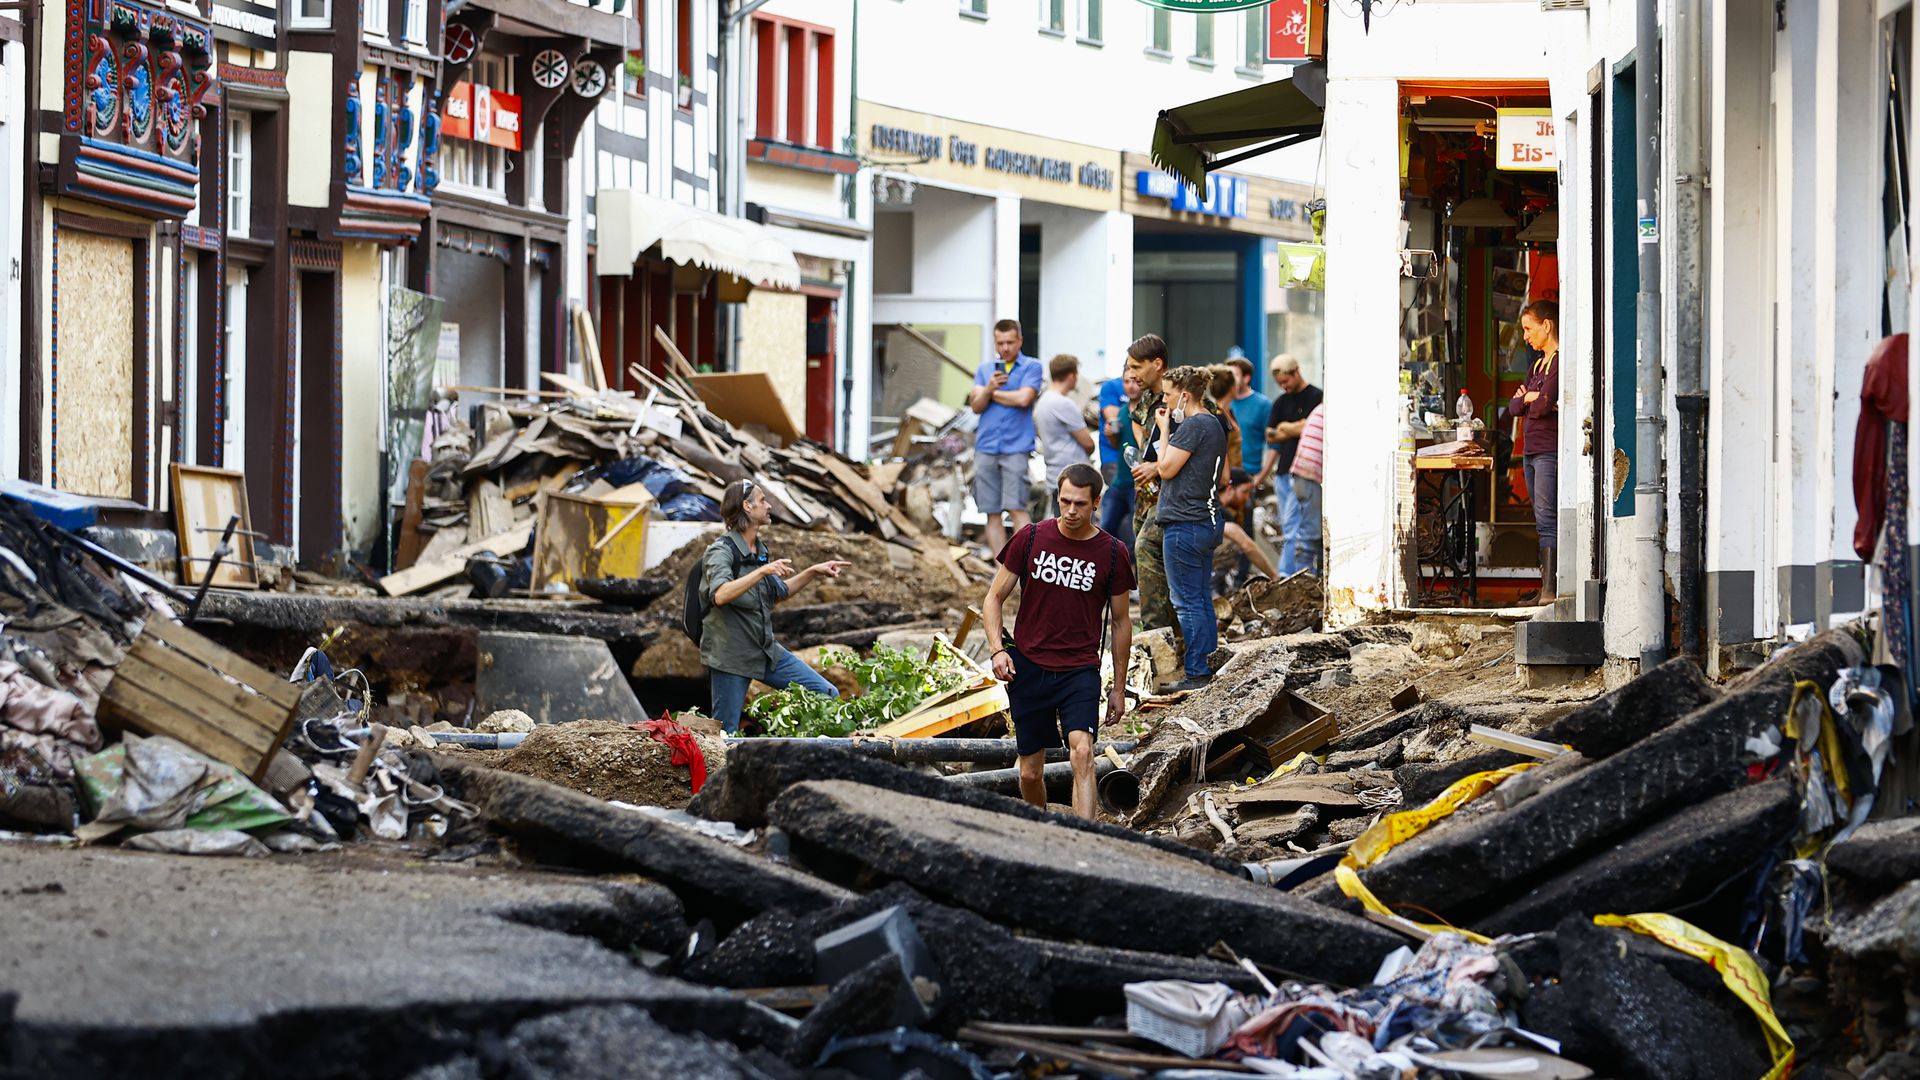 Street filled with rubble with people walking in between closed storefronts.